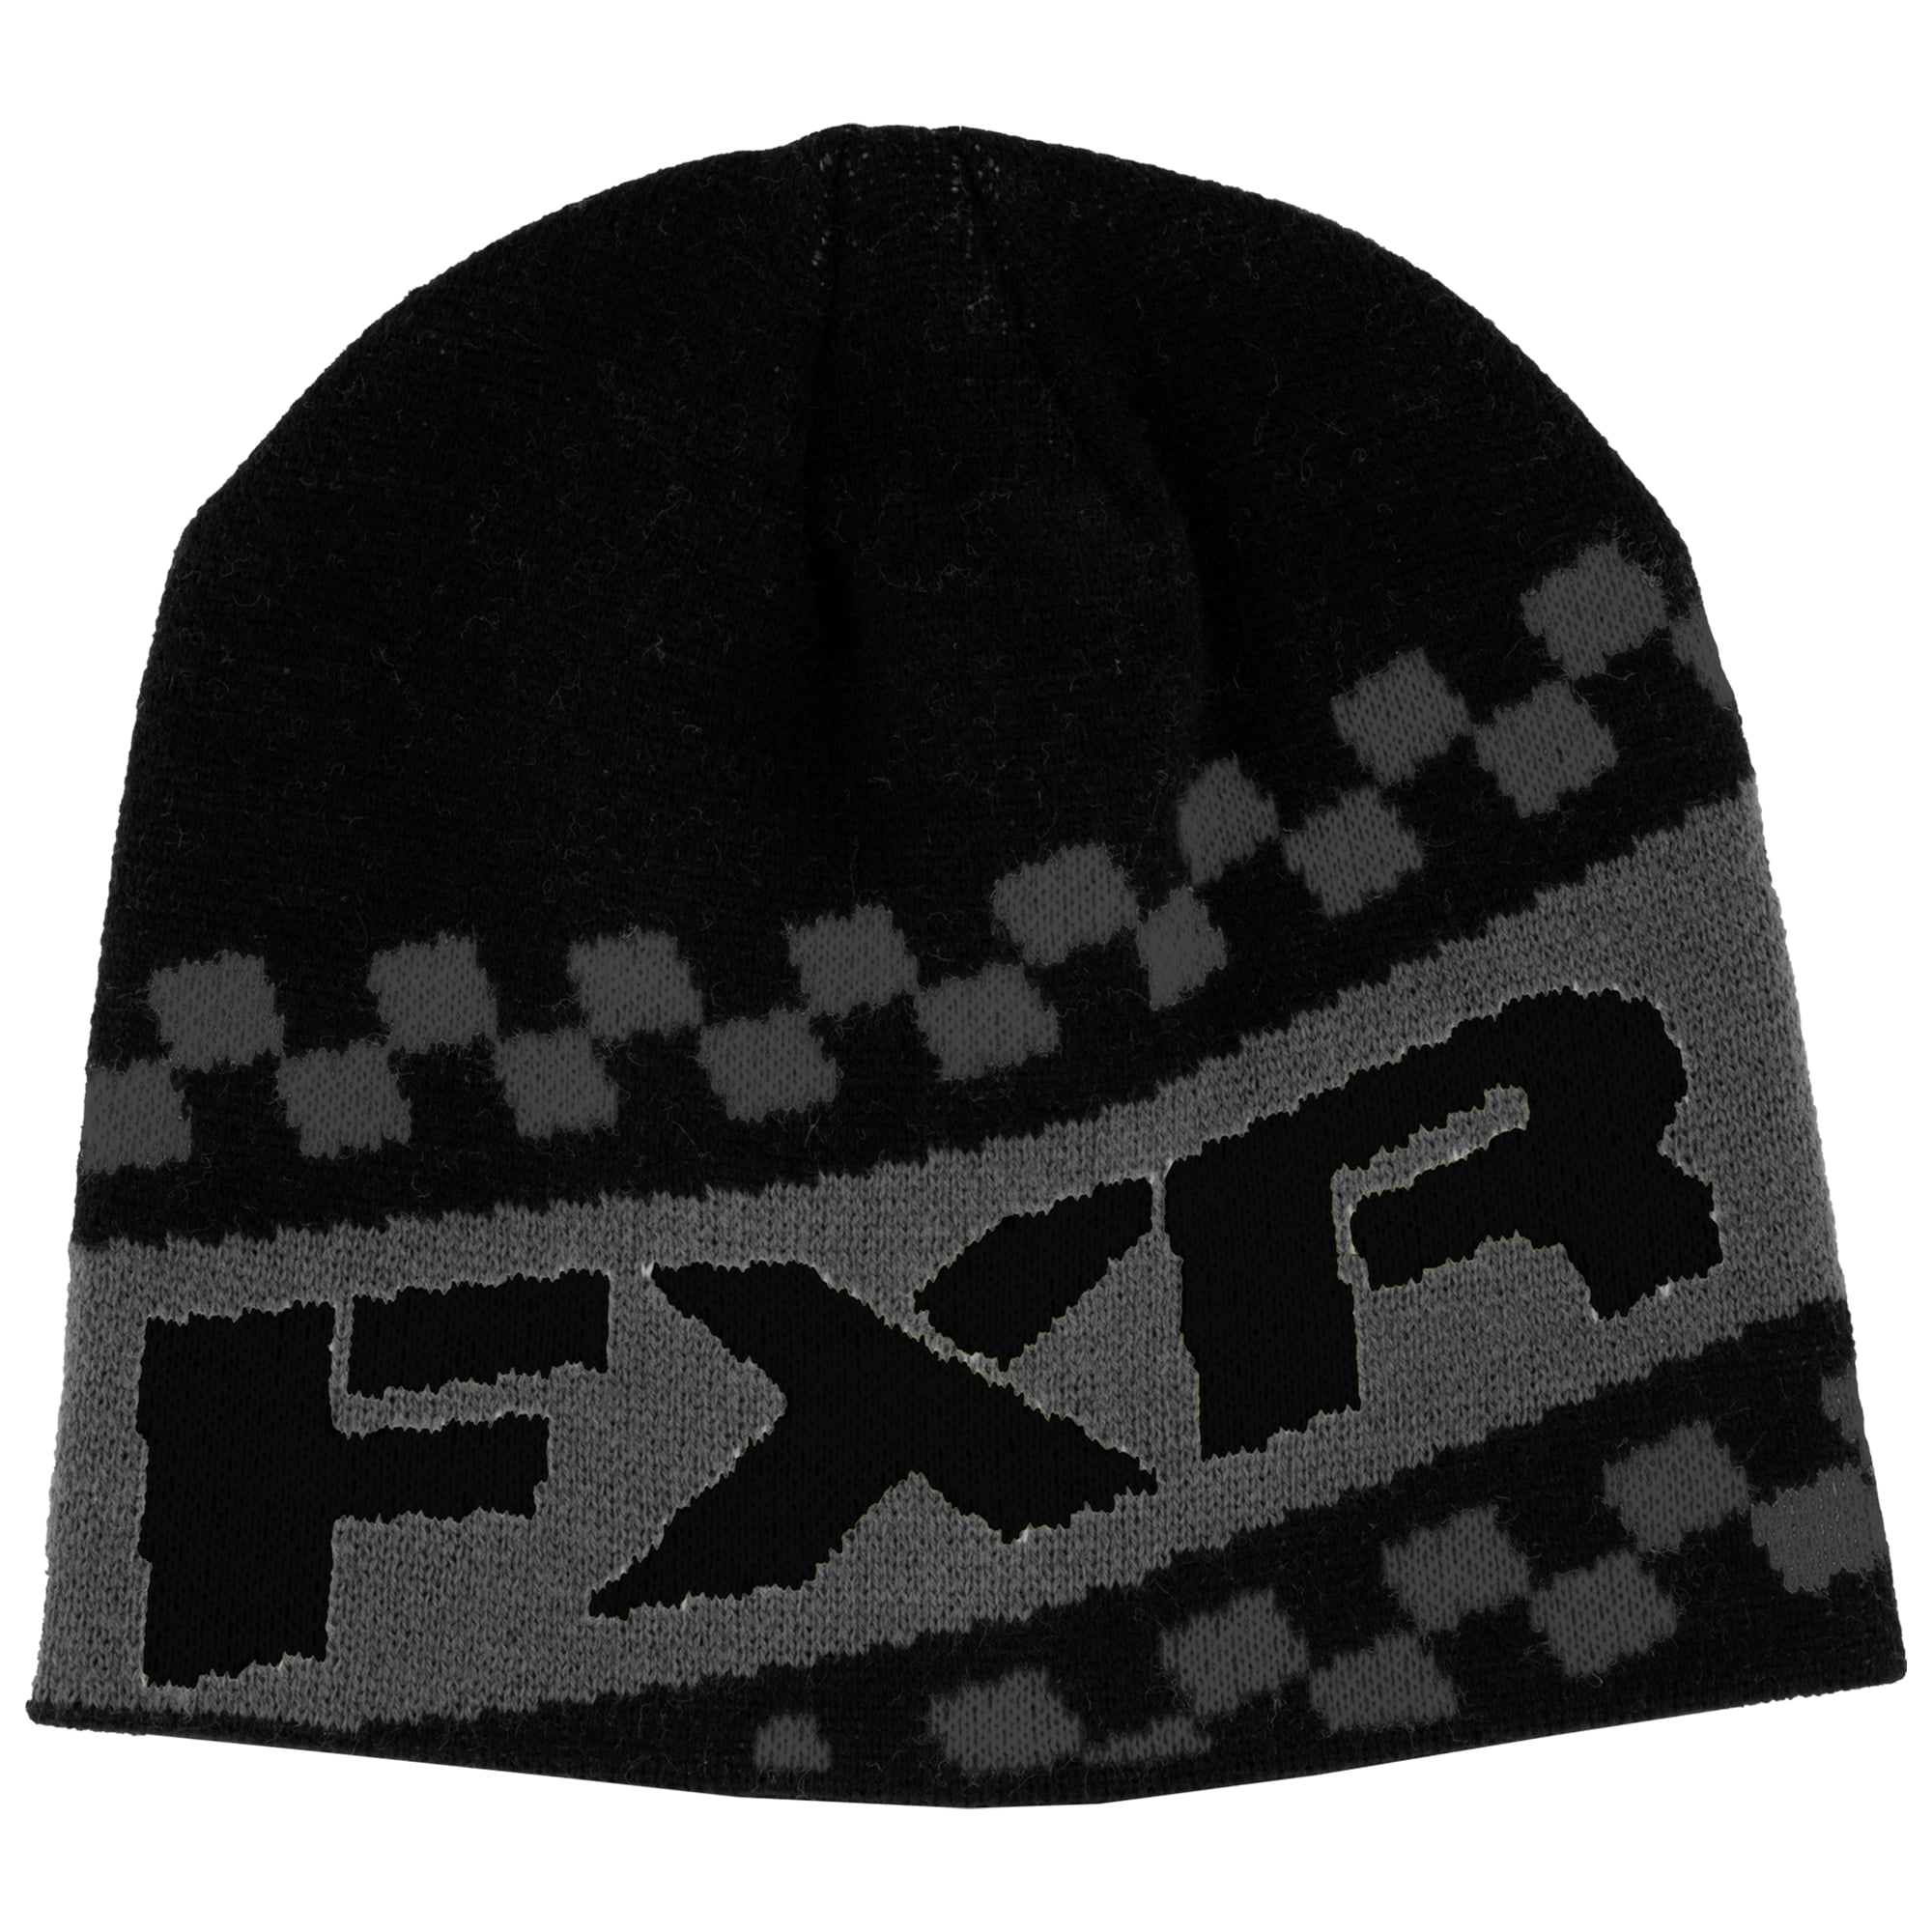 Great Gift! ONE SIZE FITS MOST 2020 FXR RACE DIVISION KNIT BEANIE CAP HAT 